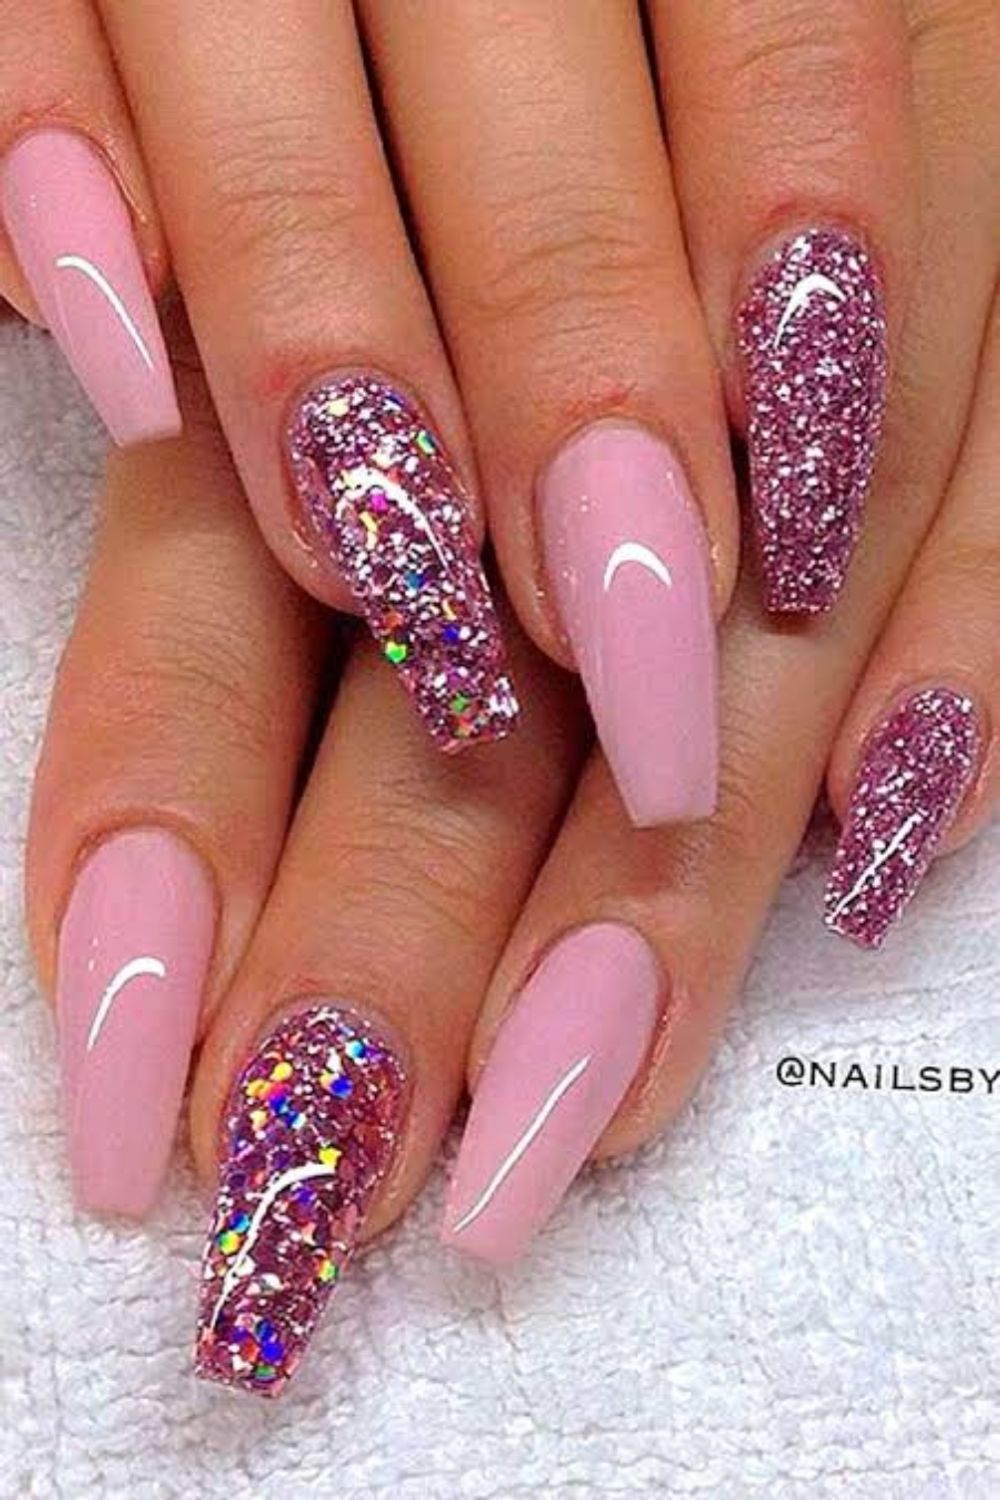 Blog | The Nail Artelier | – Nail Artists At Work | Page 47